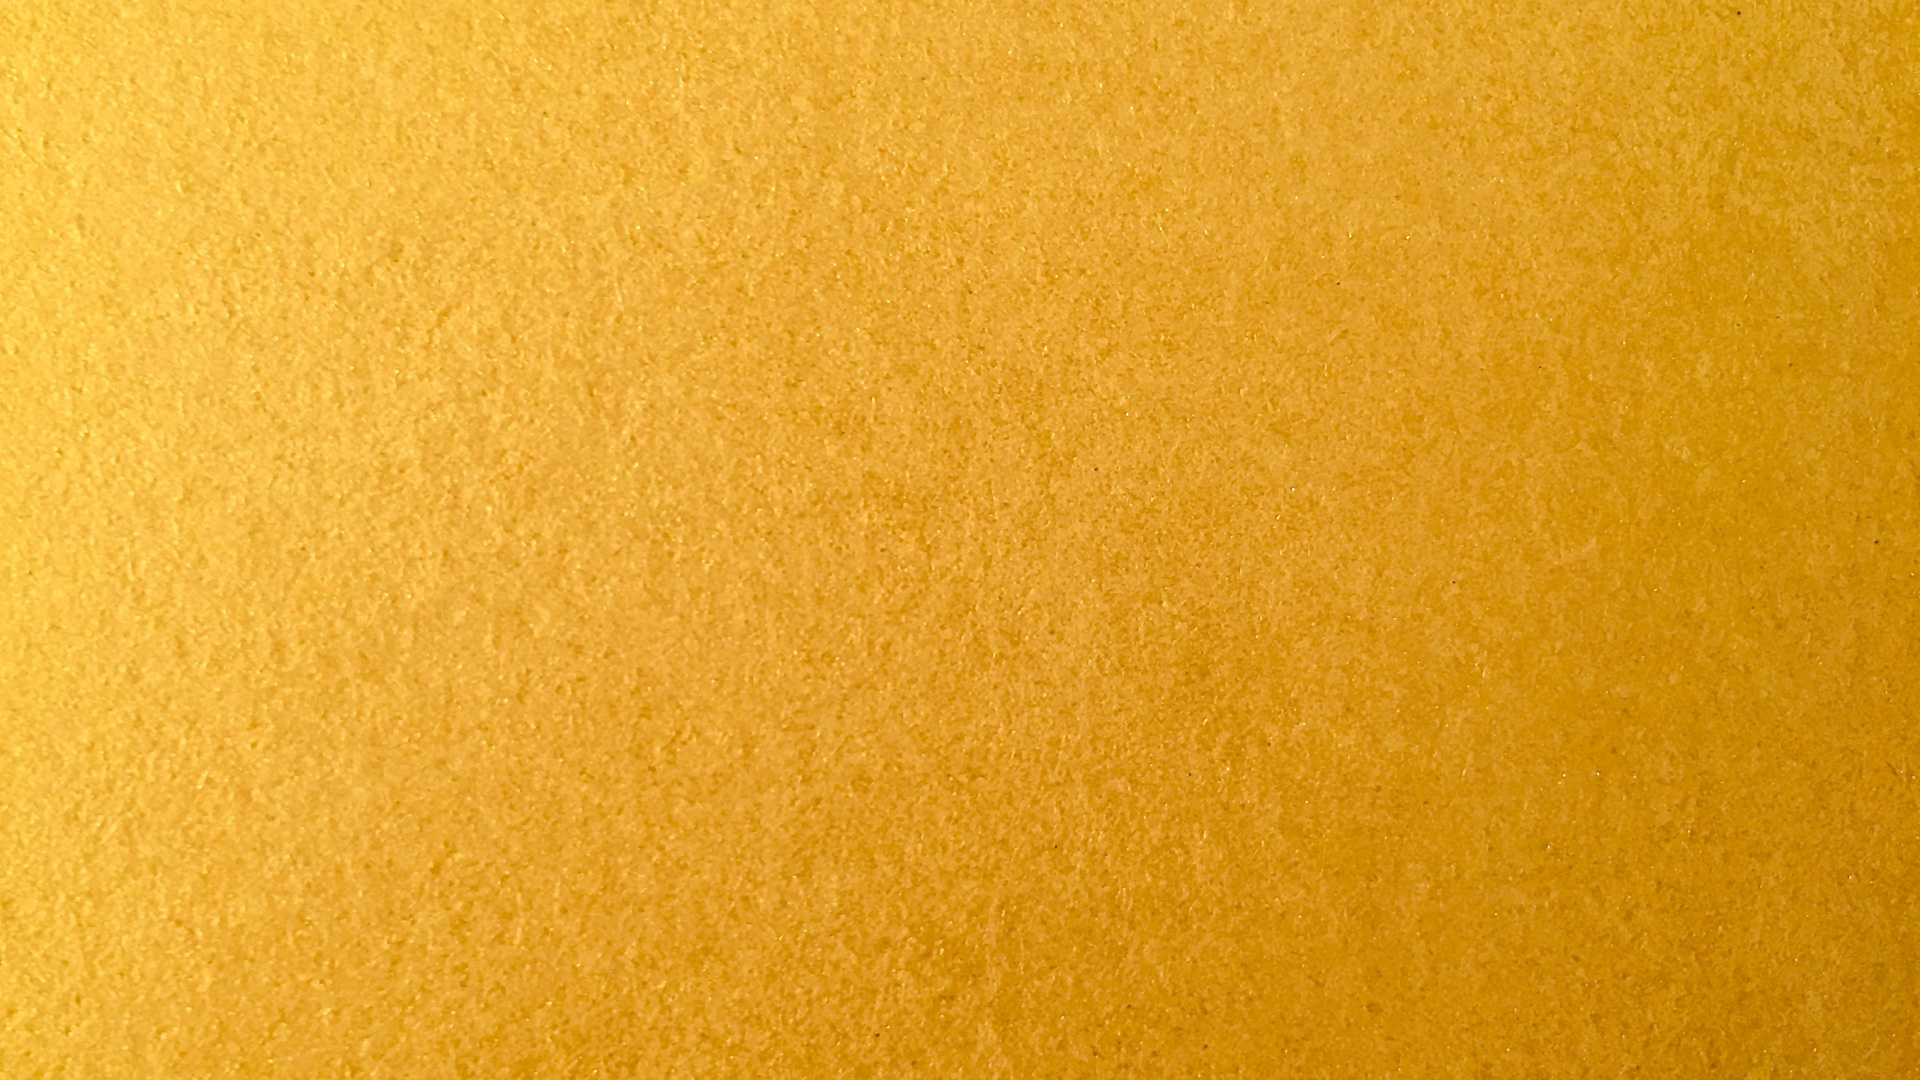 Yellow Textile in Close up Image. Wallpaper in 1920x1080 Resolution